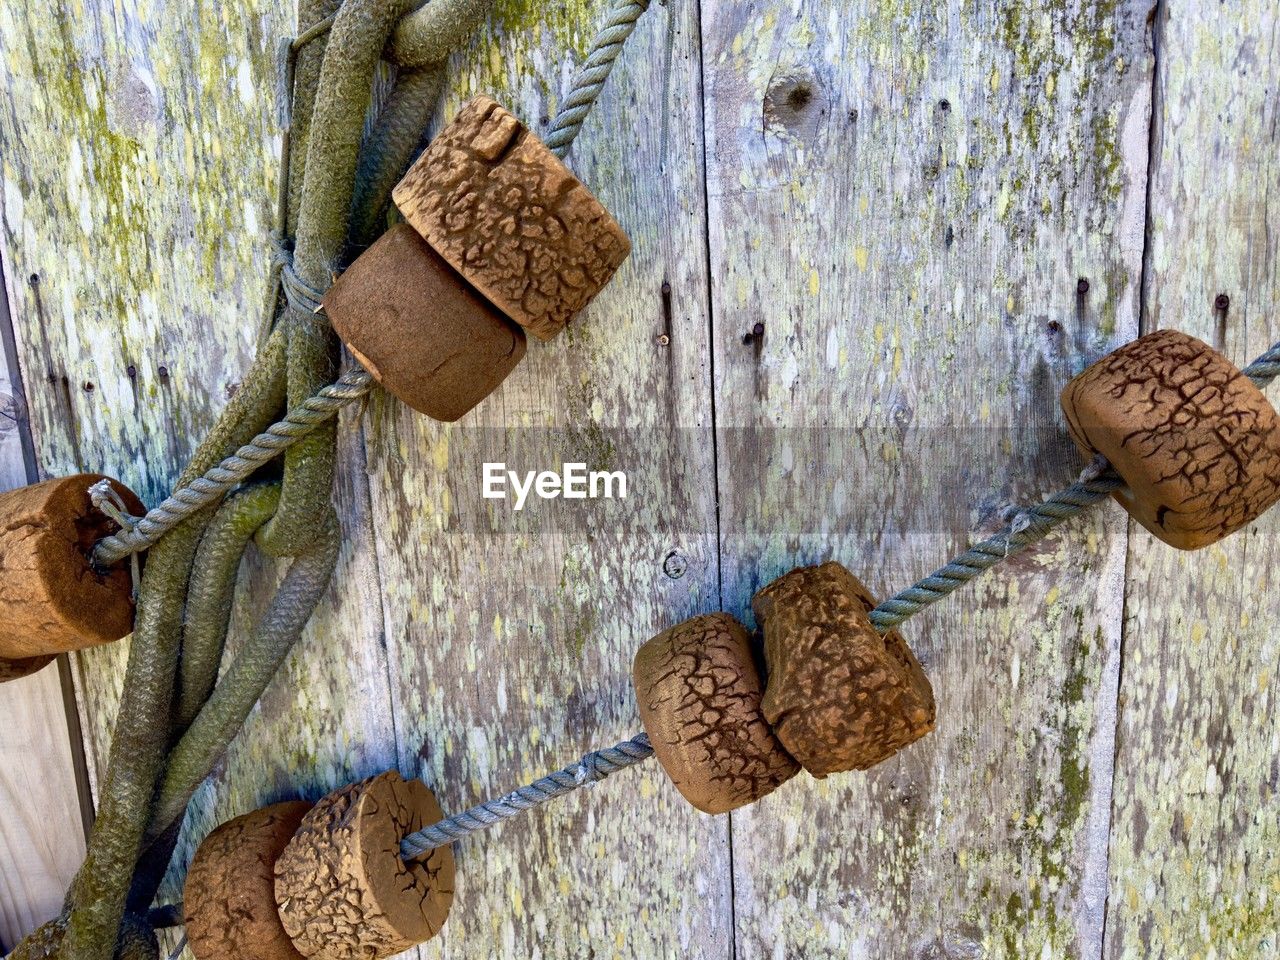 wood, hanging, no people, day, close-up, rope, outdoors, nature, metal, leaf, brown, plant